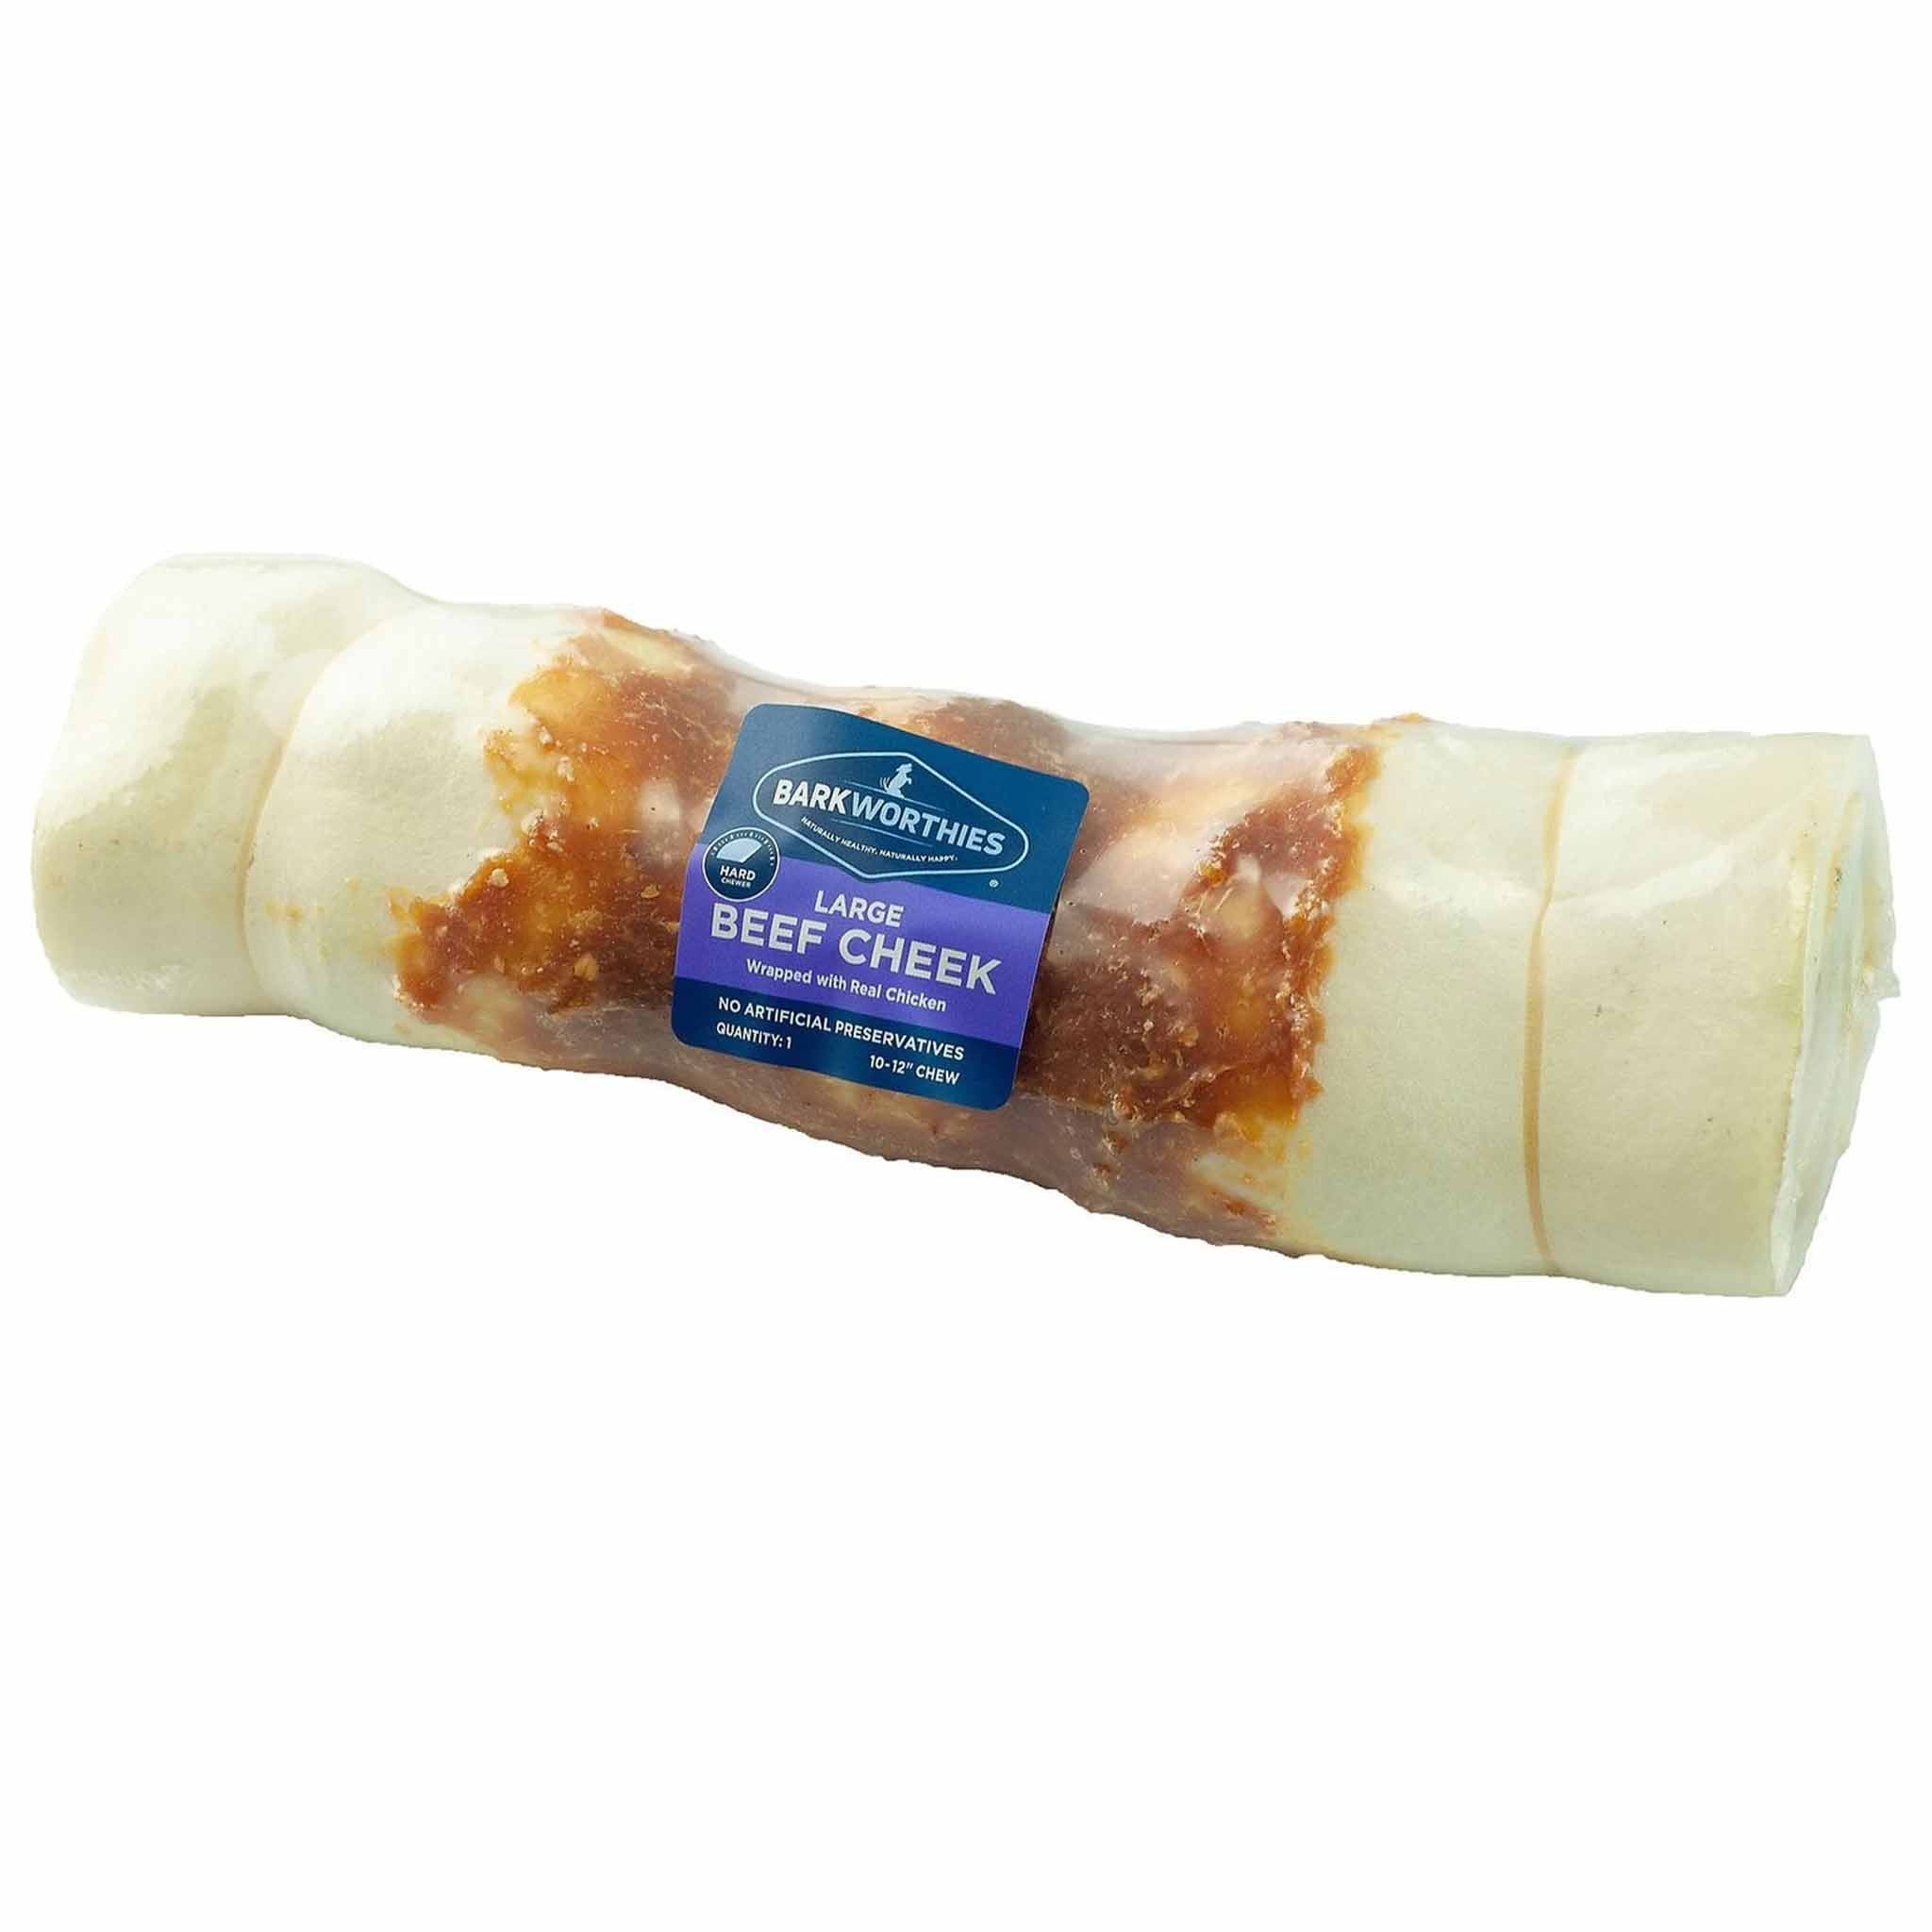 Barkworthies Beef Cheek Wrapped with Chicken Dog Treat, Large